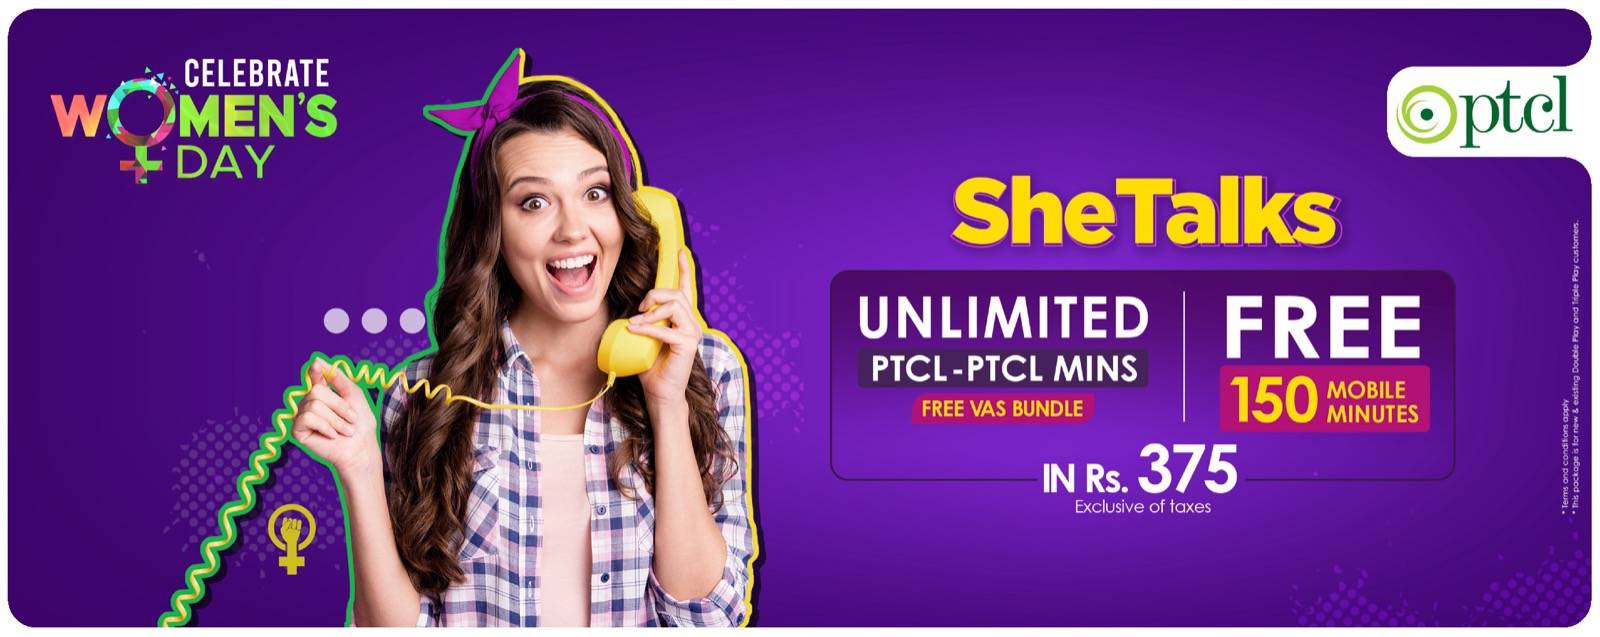 PTCL launches exclusive “SheTalksPackage” to mark International Women’s Day